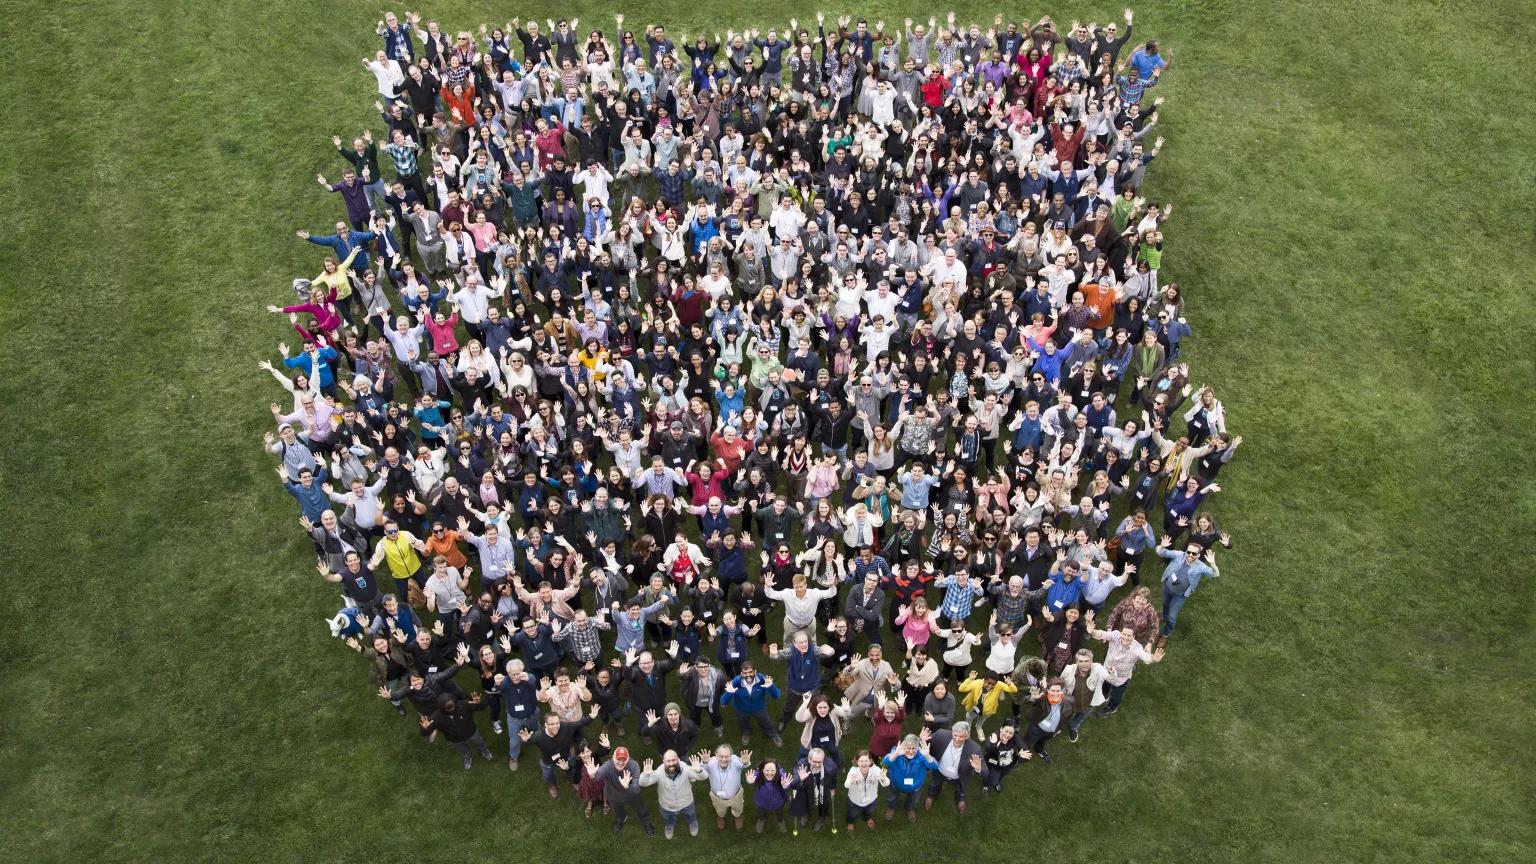 An aerial view of NRDC staffers standing together in the shape of a shield on green grass